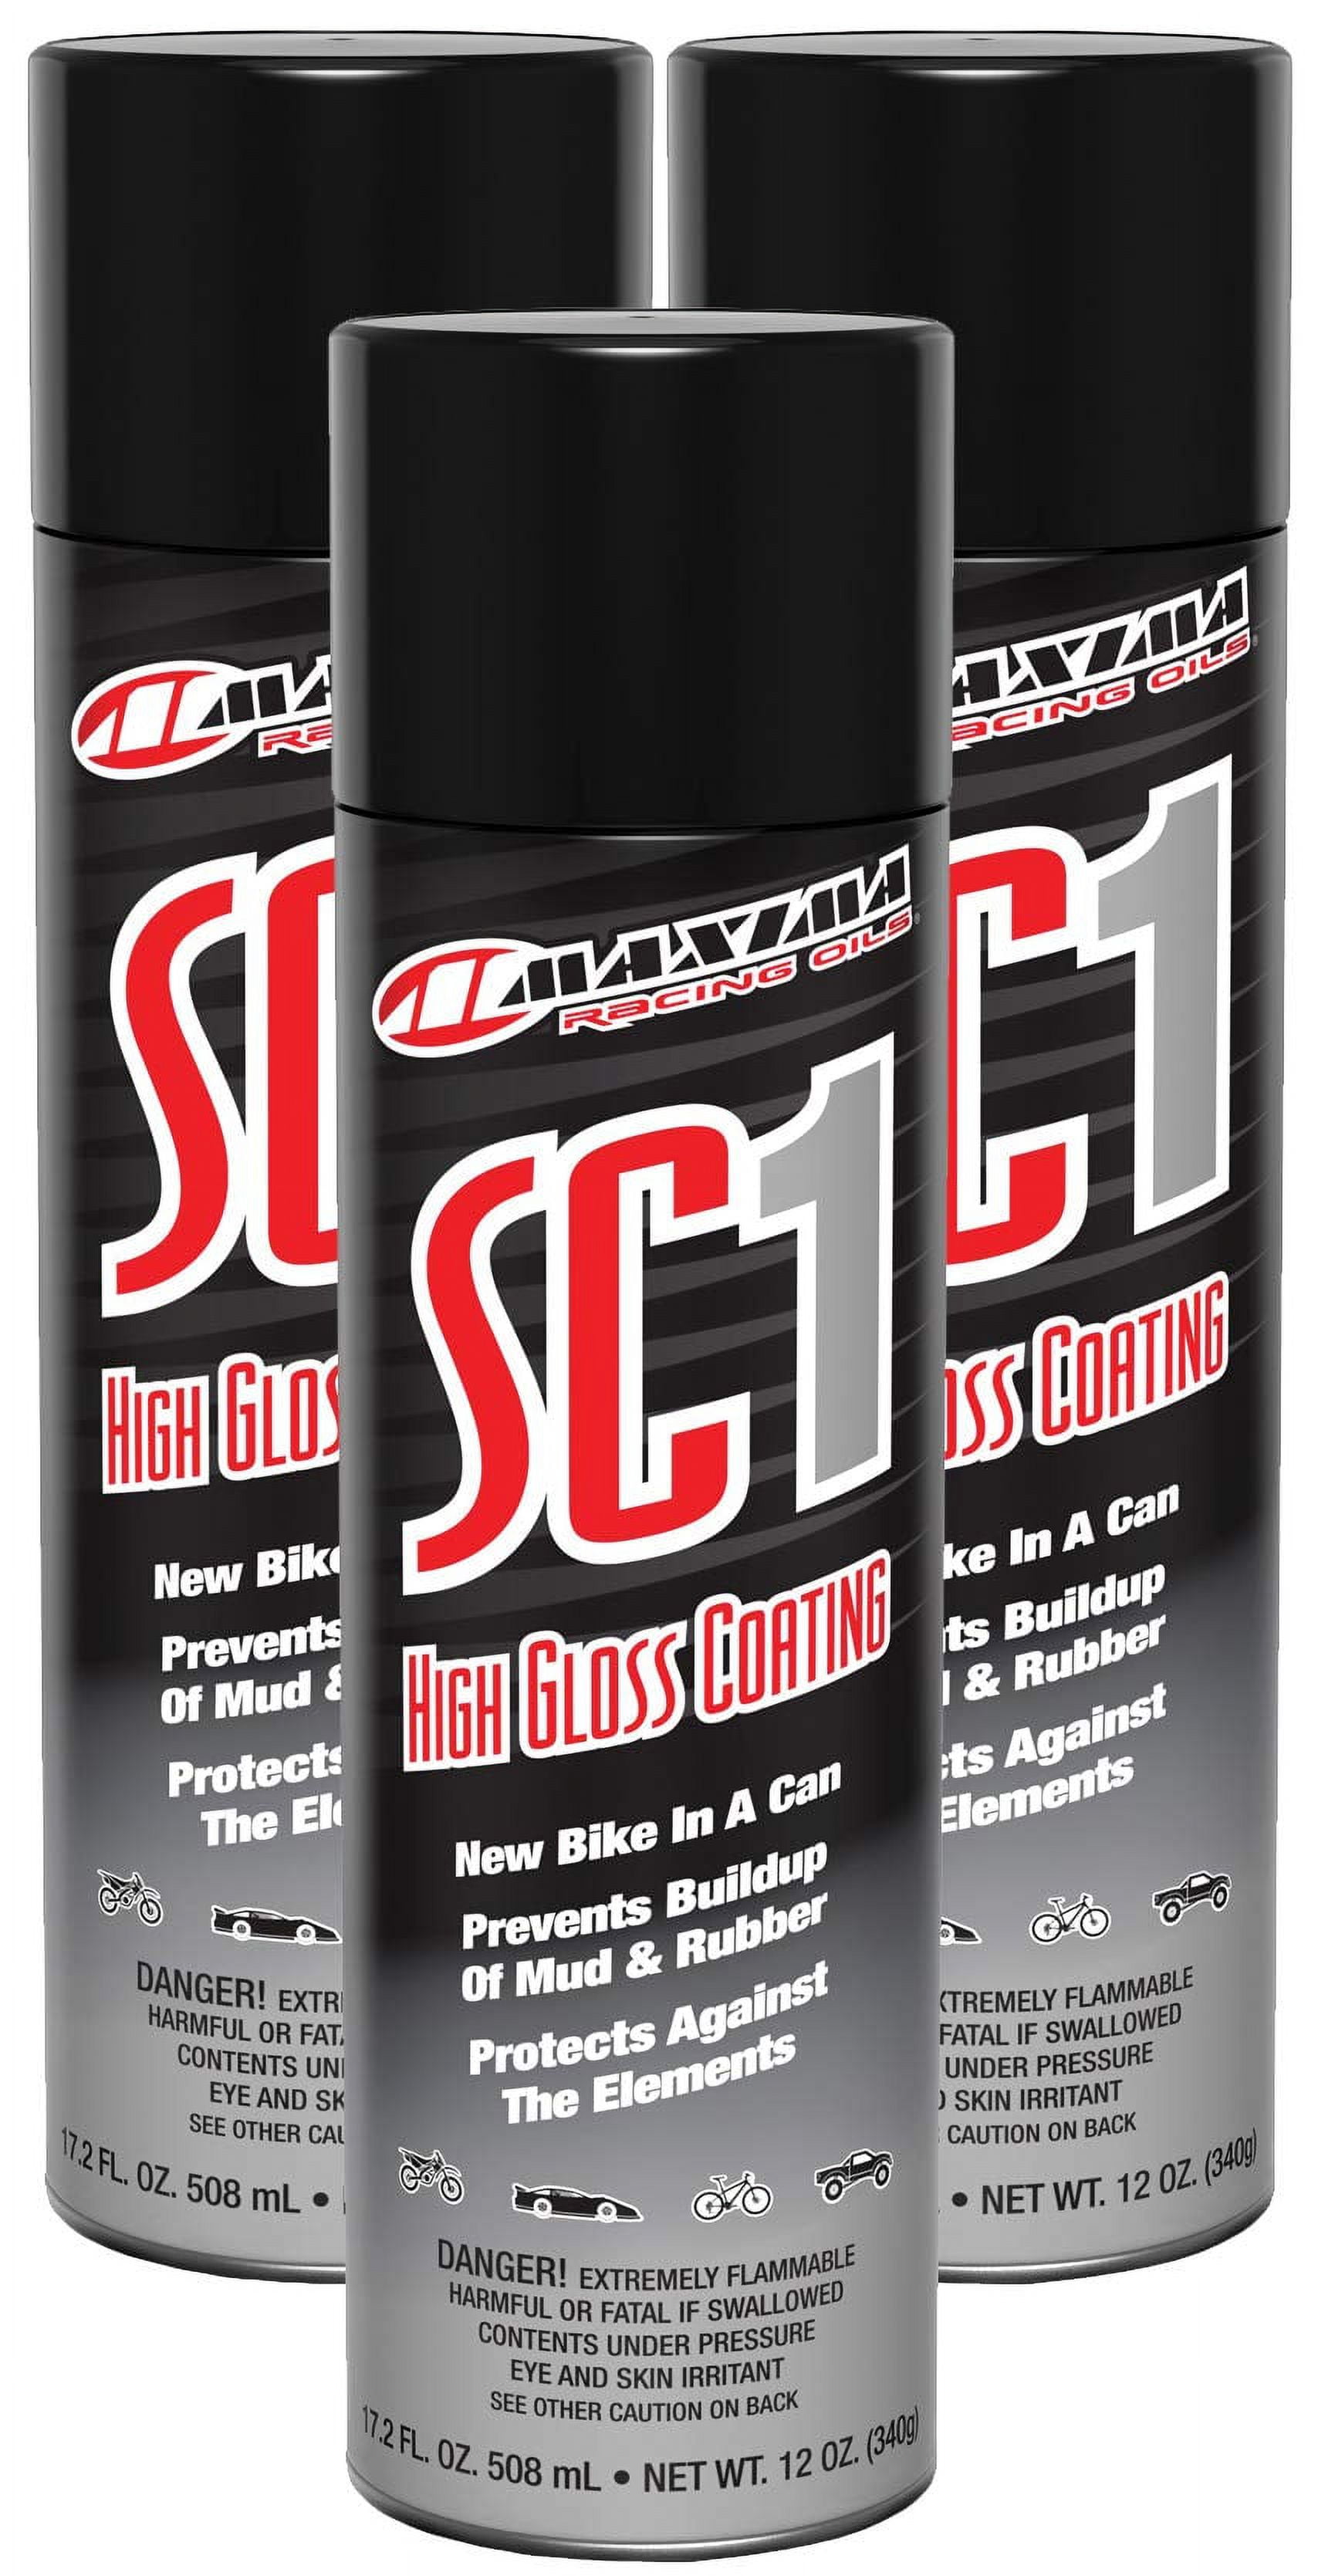 78920 SC1 High Gloss Coating 17.2 fl. oz. 508 ml - Net Wt. 12 oz. (340g), Single, High Gloss SC1 Clear Coat Is Specifically Formulated for The